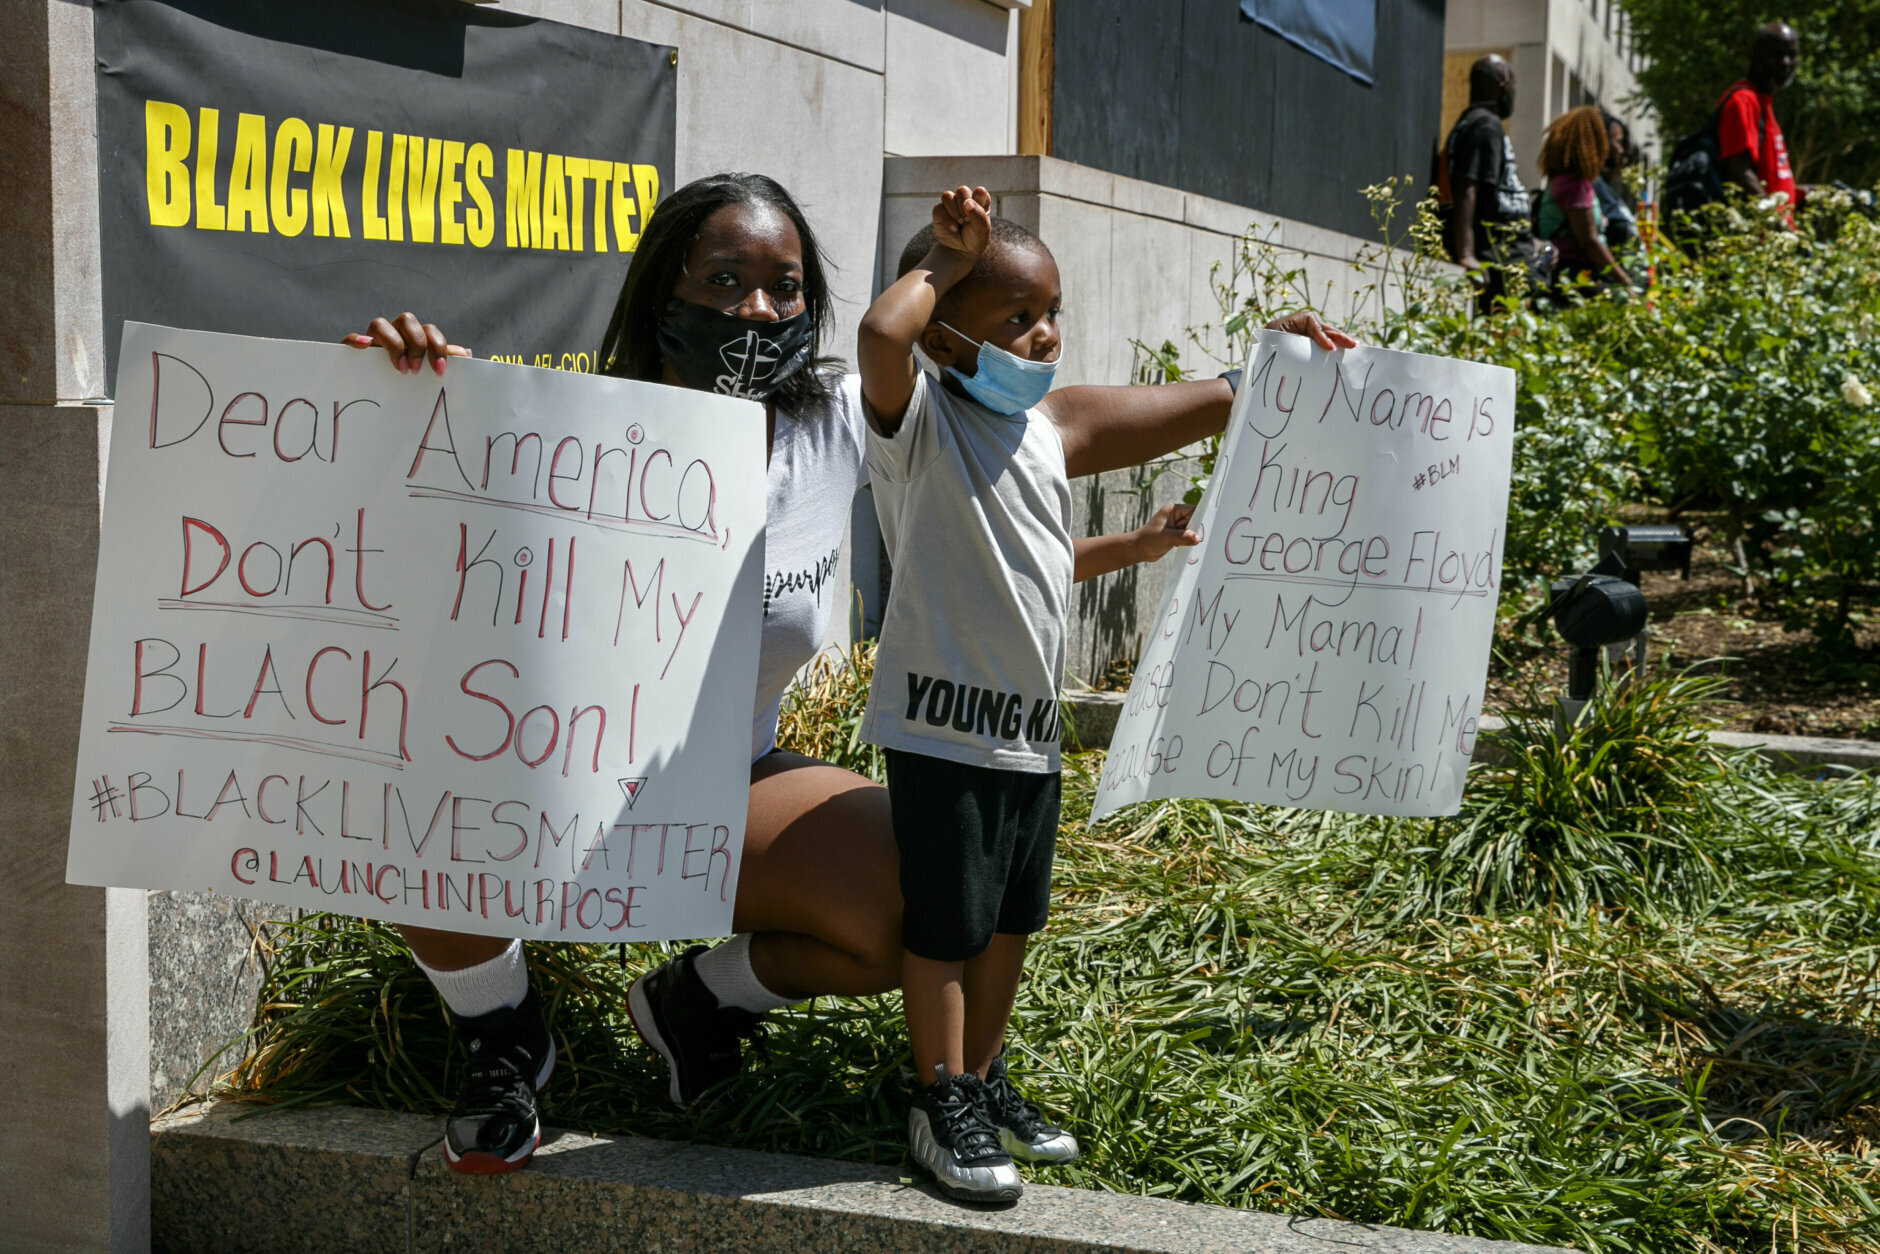 Eileen Perry, of Washington, and her son Micah Coleman, 3, attend a protest, Sunday, June 7, 2020, near the White House in Washington, over the death of George Floyd, a black man who was in police custody in Minneapolis. Floyd died after being restrained by Minneapolis police officers. "Our ancestors marched for us to have equality," says Perry, "this is history now as well and I wanted my kids to see that." (AP Photo/Jacquelyn Martin)